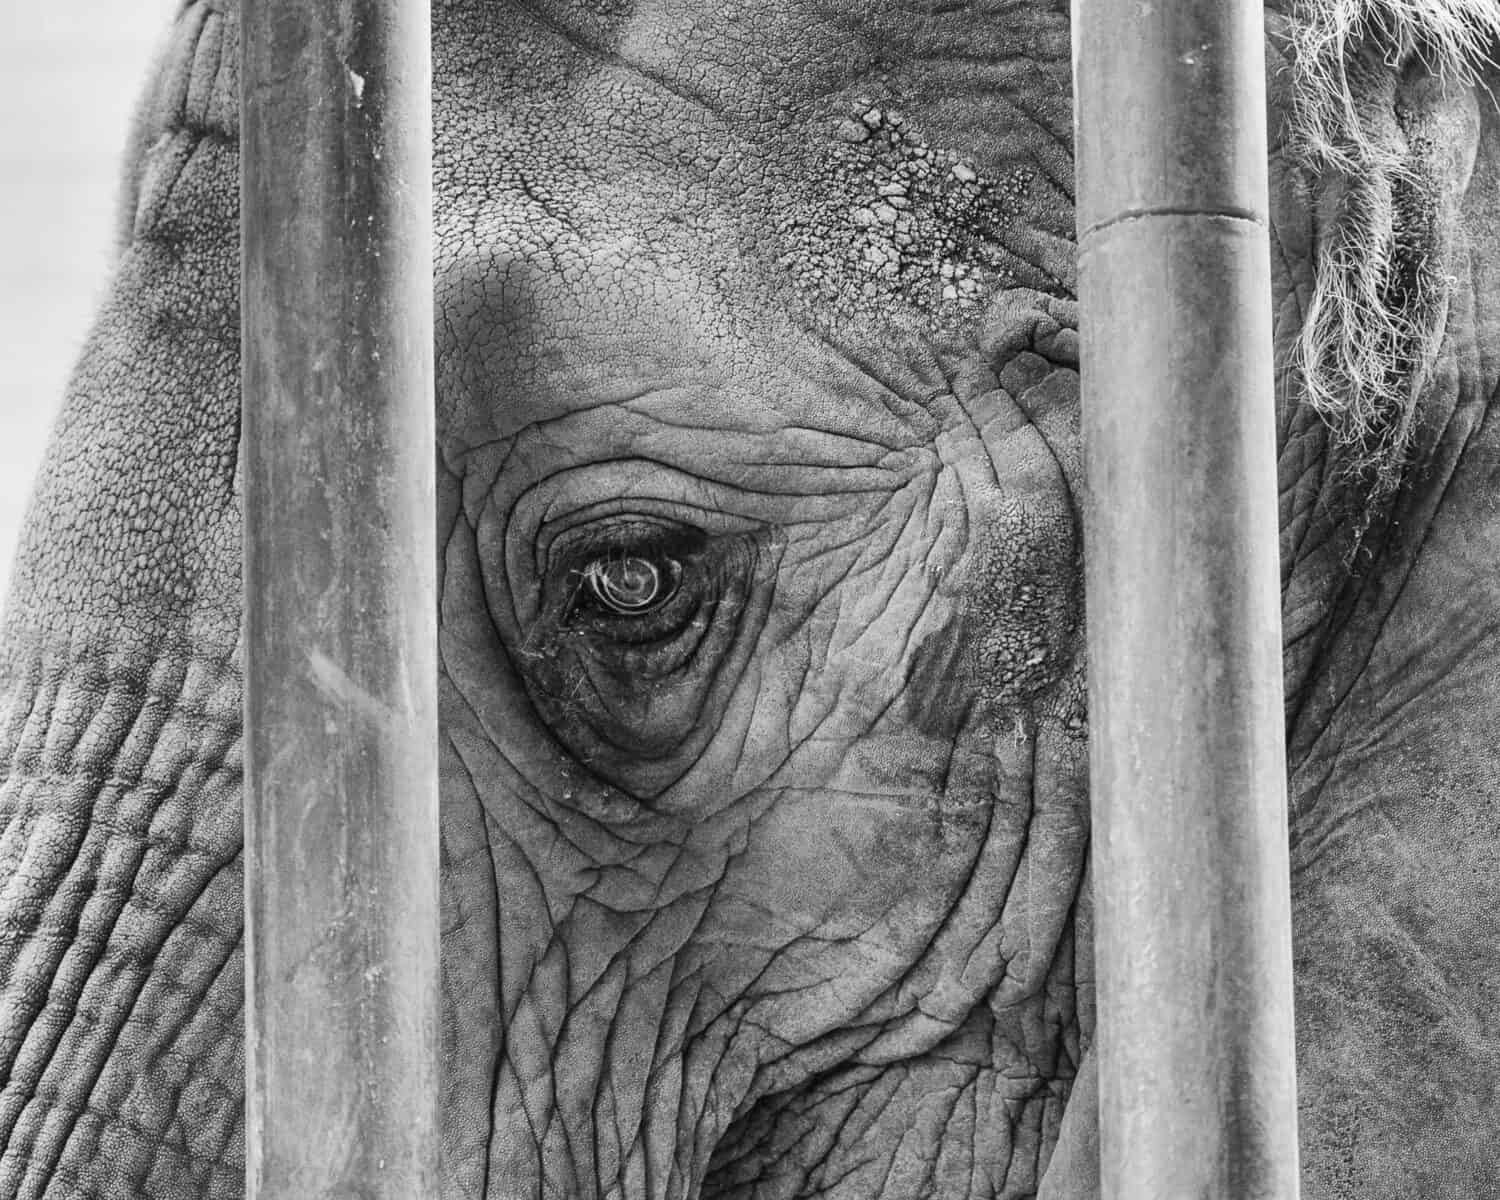 A black and white elephant head through the bars of a zoo cage.